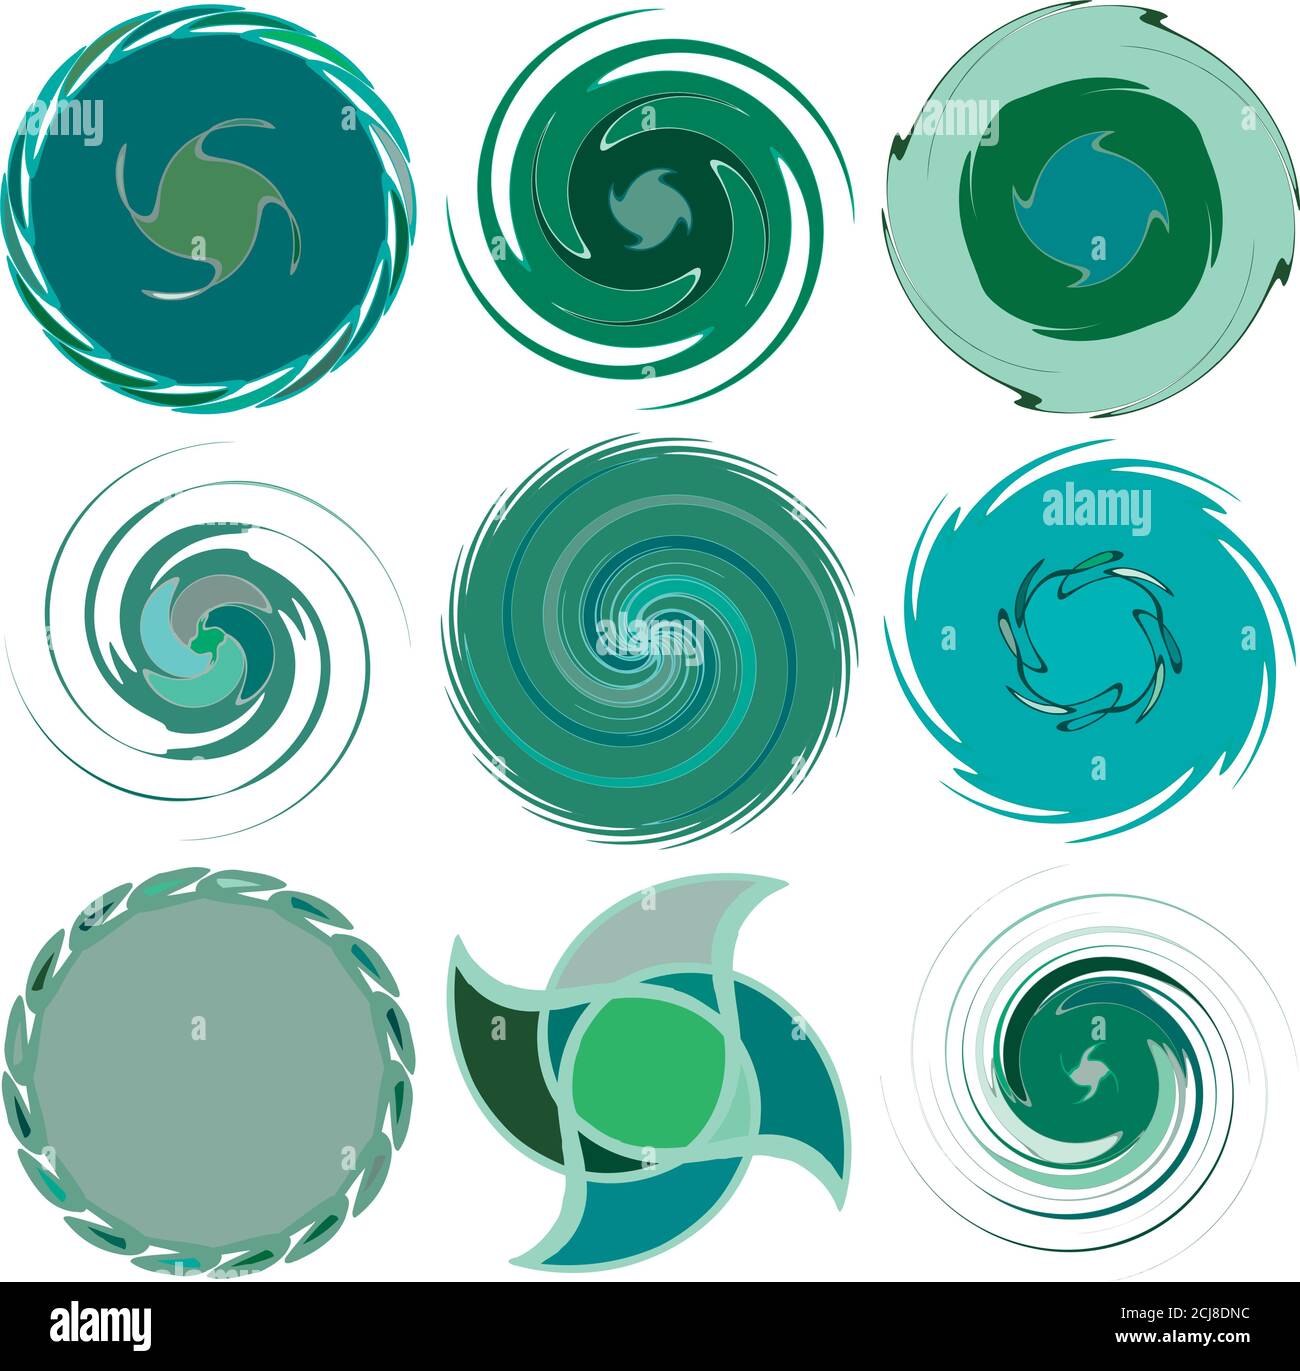 Abstract concentric, radial, concentric spiral, swirl, twirl and vortex shapes. Design elements with rotation, gyre, torsion effect. Abstract circular Stock Vector